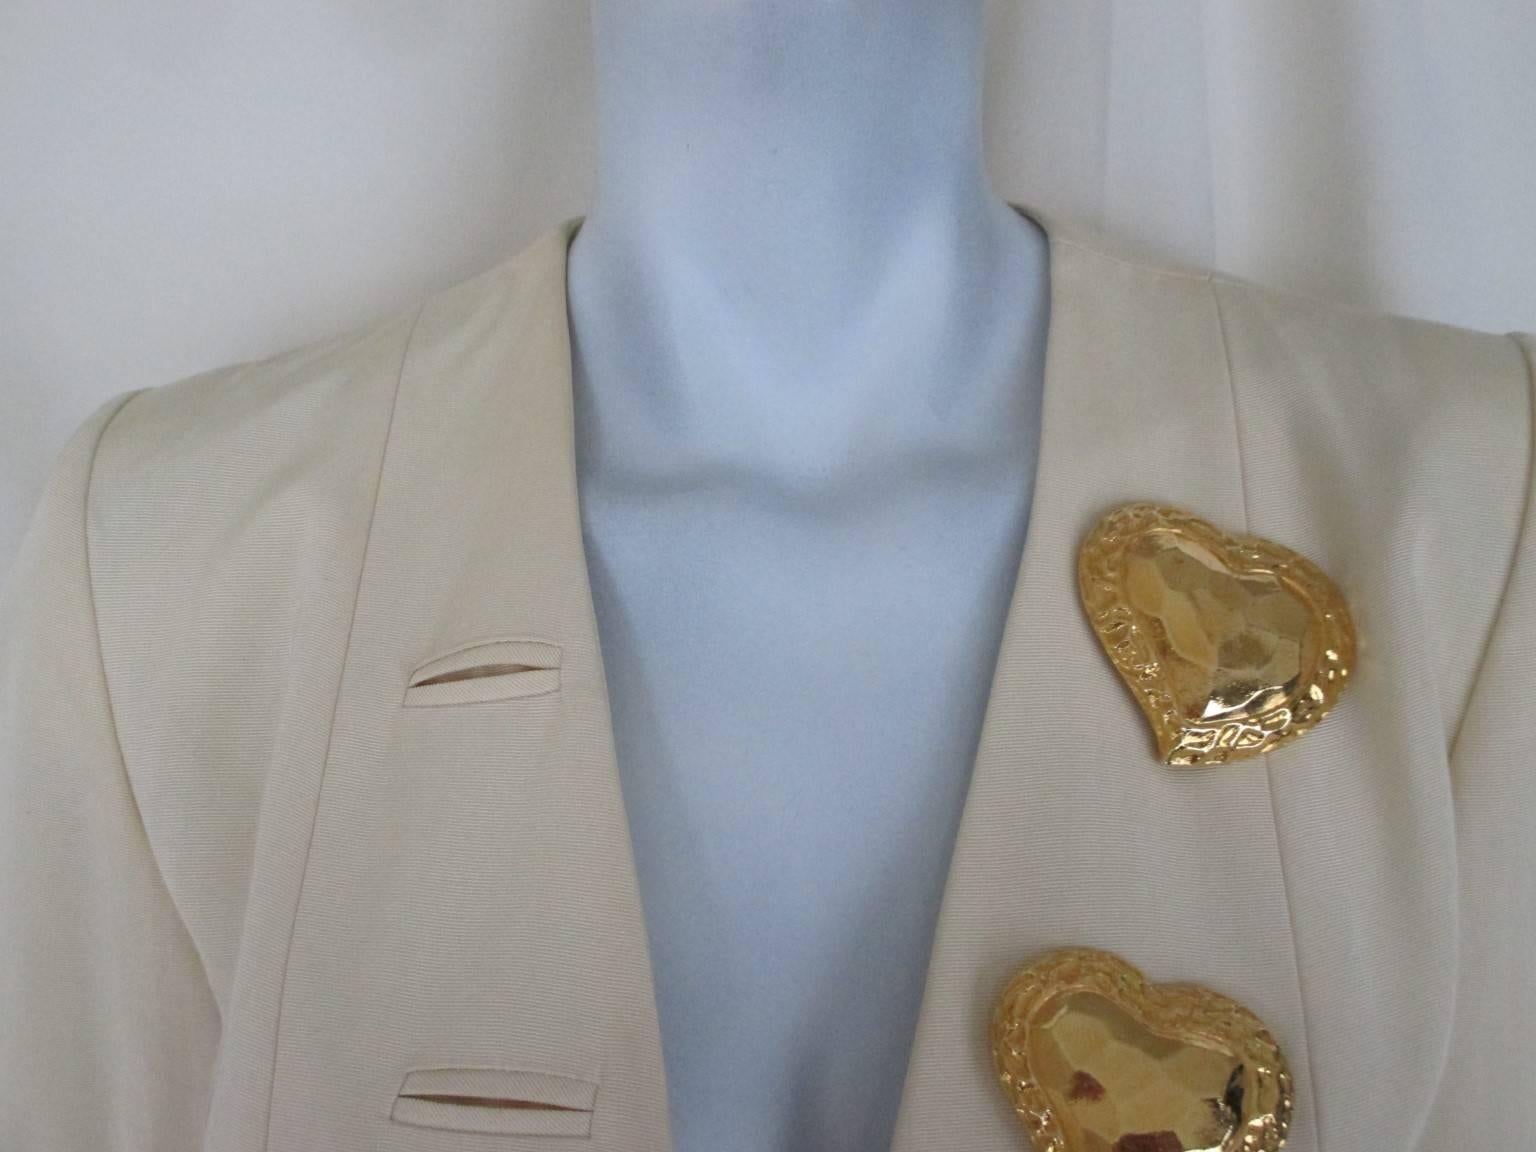 Vintage YSL jacket with 4 gold color heart buttons
no pockets
Its in very good vintage condition
Size is france 40 and US 8
